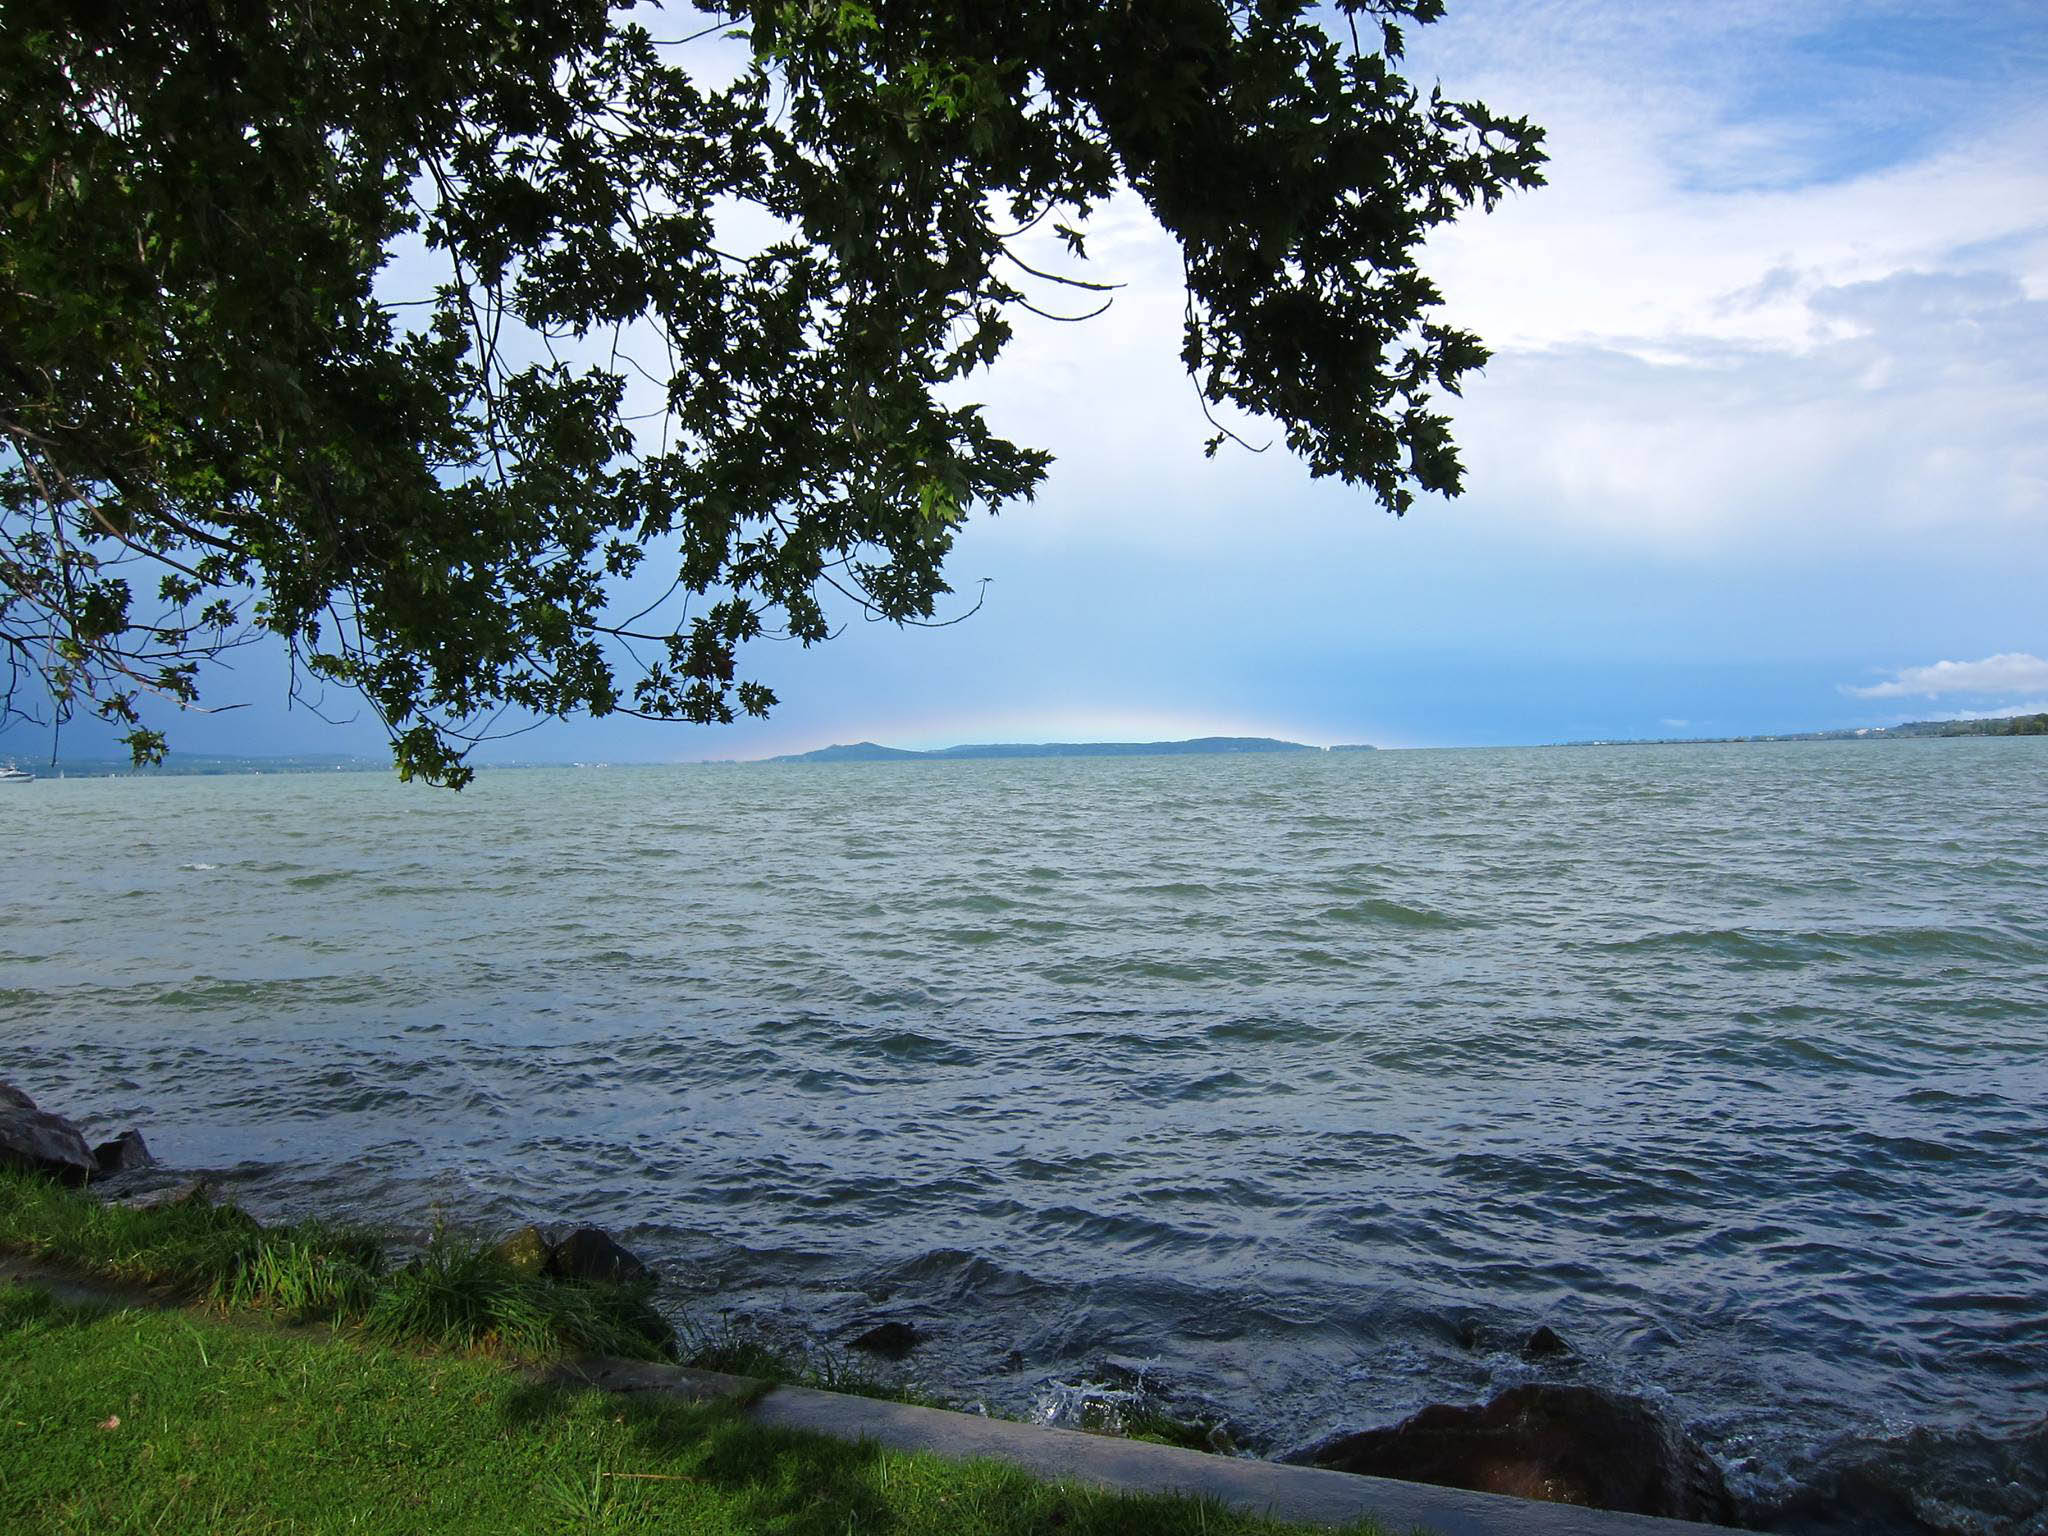 Cristina Apetrei: from the harbour in Balatonszemes, with a small rainbow on the horizon; probably 2014